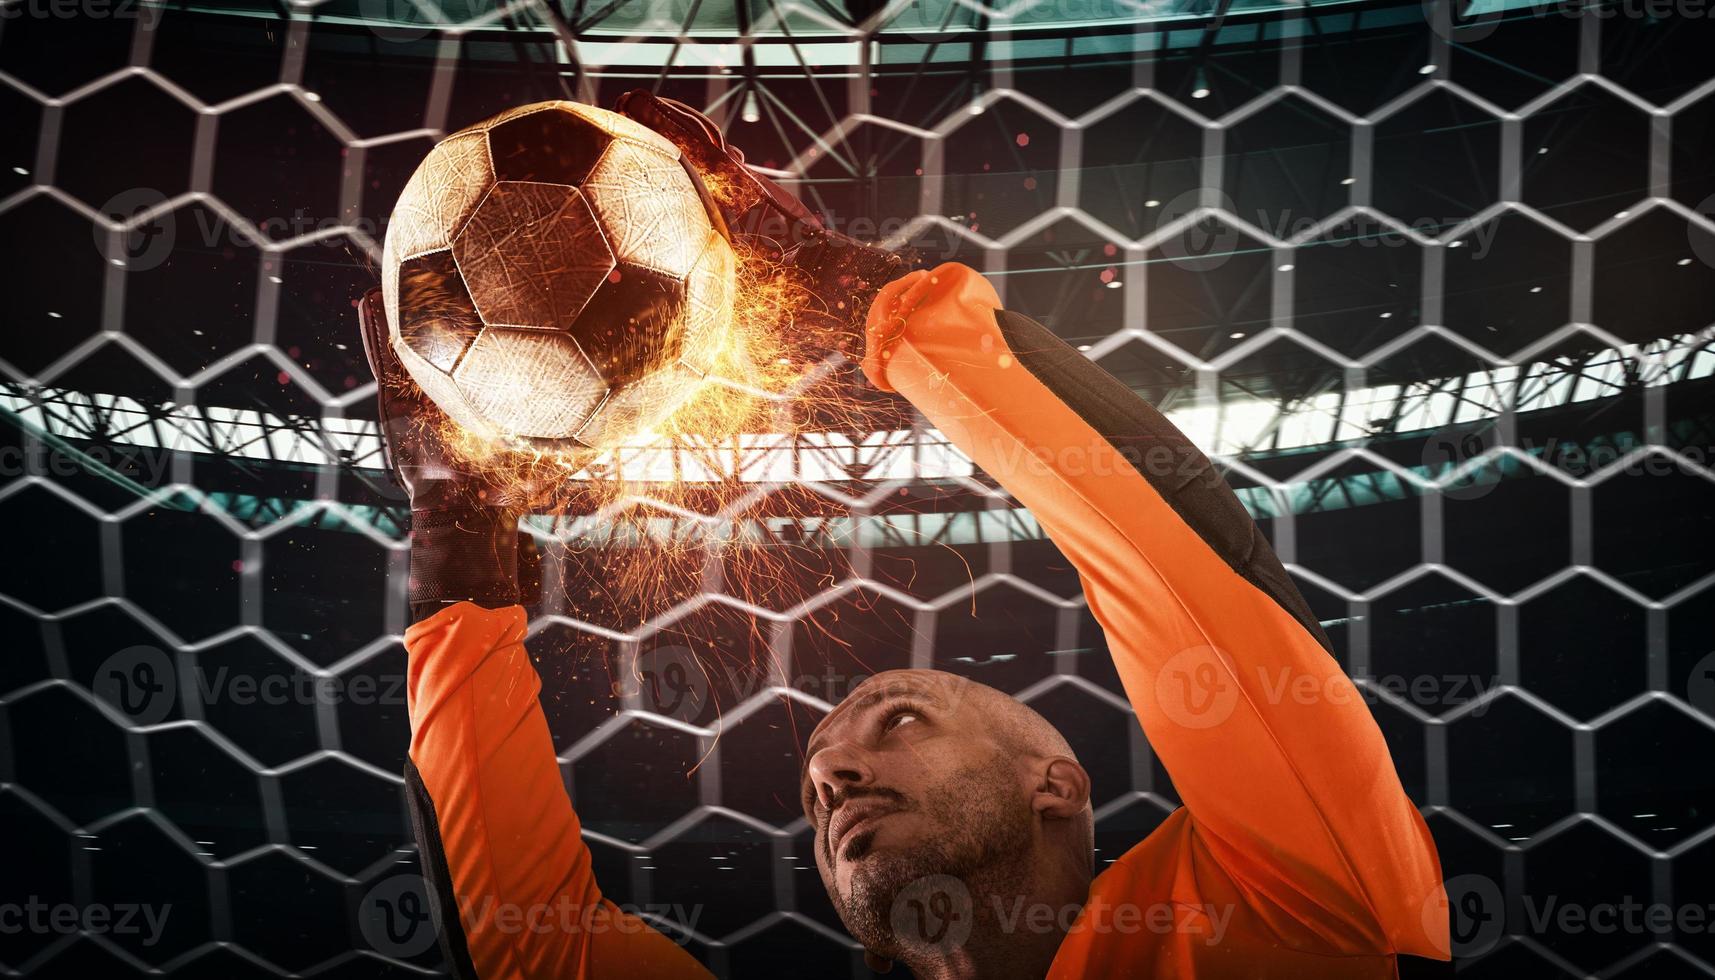 Close up of a soccer scene at night match with a goalkeeper trying to catch a fiery ball photo